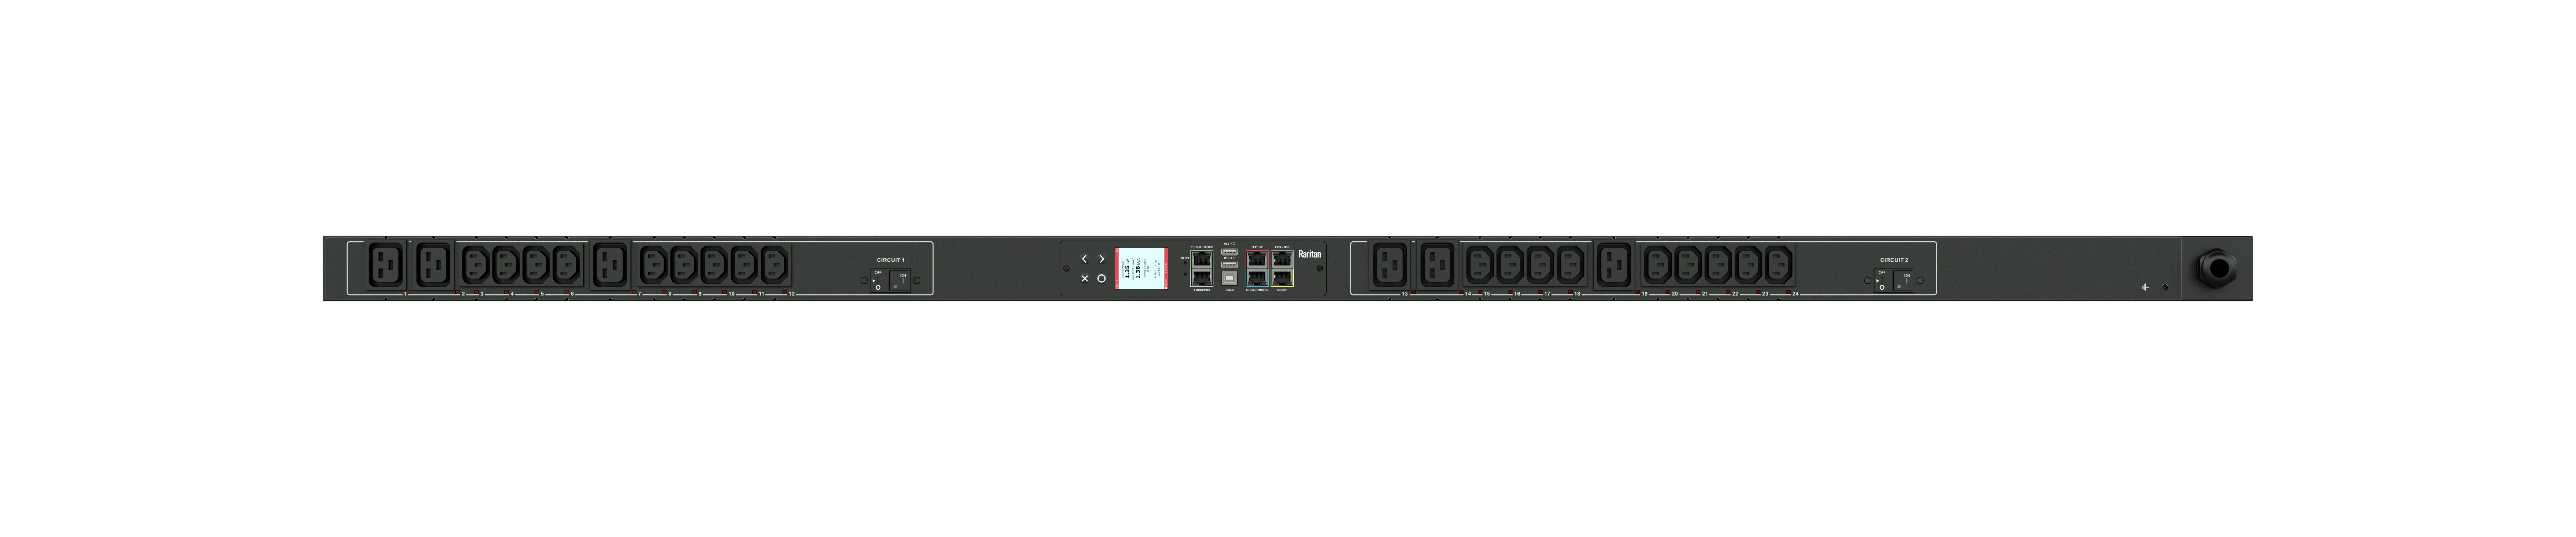 Raritan Monitored and Switched rack power distribution unit,7.4kVA, 230V 32A - IEC 60309 with 18@C13 6@C19 OU [vertical] Outlets